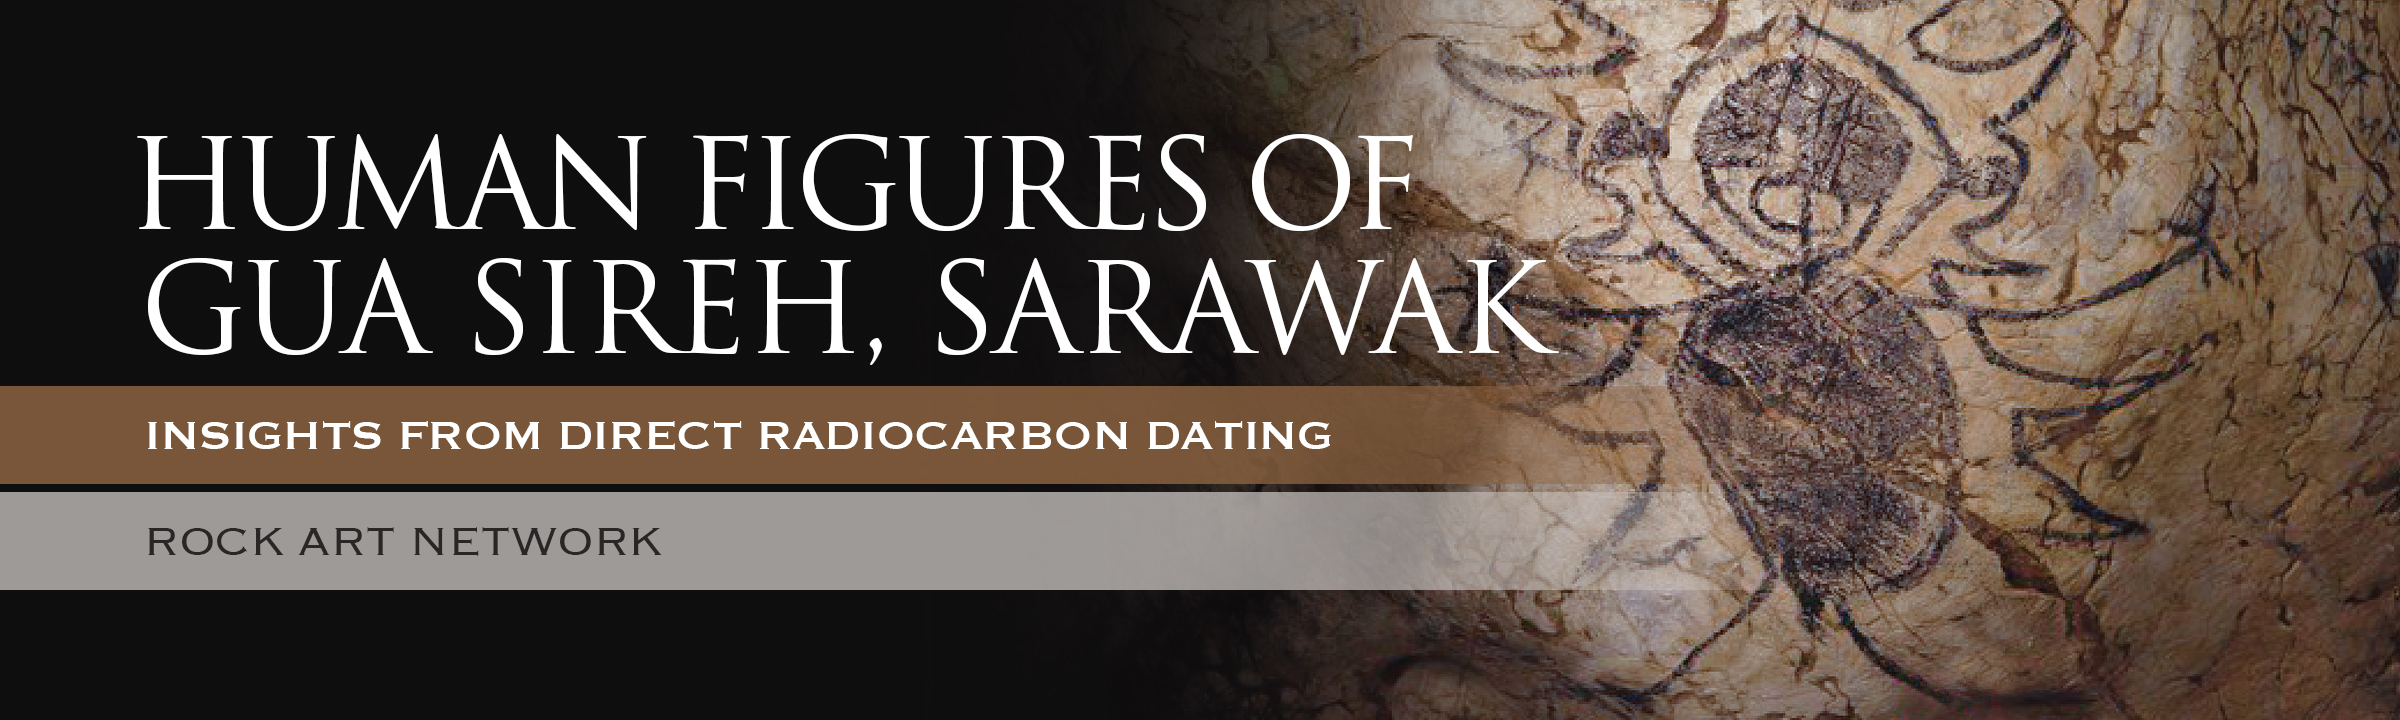 Rock art and frontier conflict in Southeast Asia: Insights from direct radiocarbon ages for the large human figures of Gua Sireh Sarawak